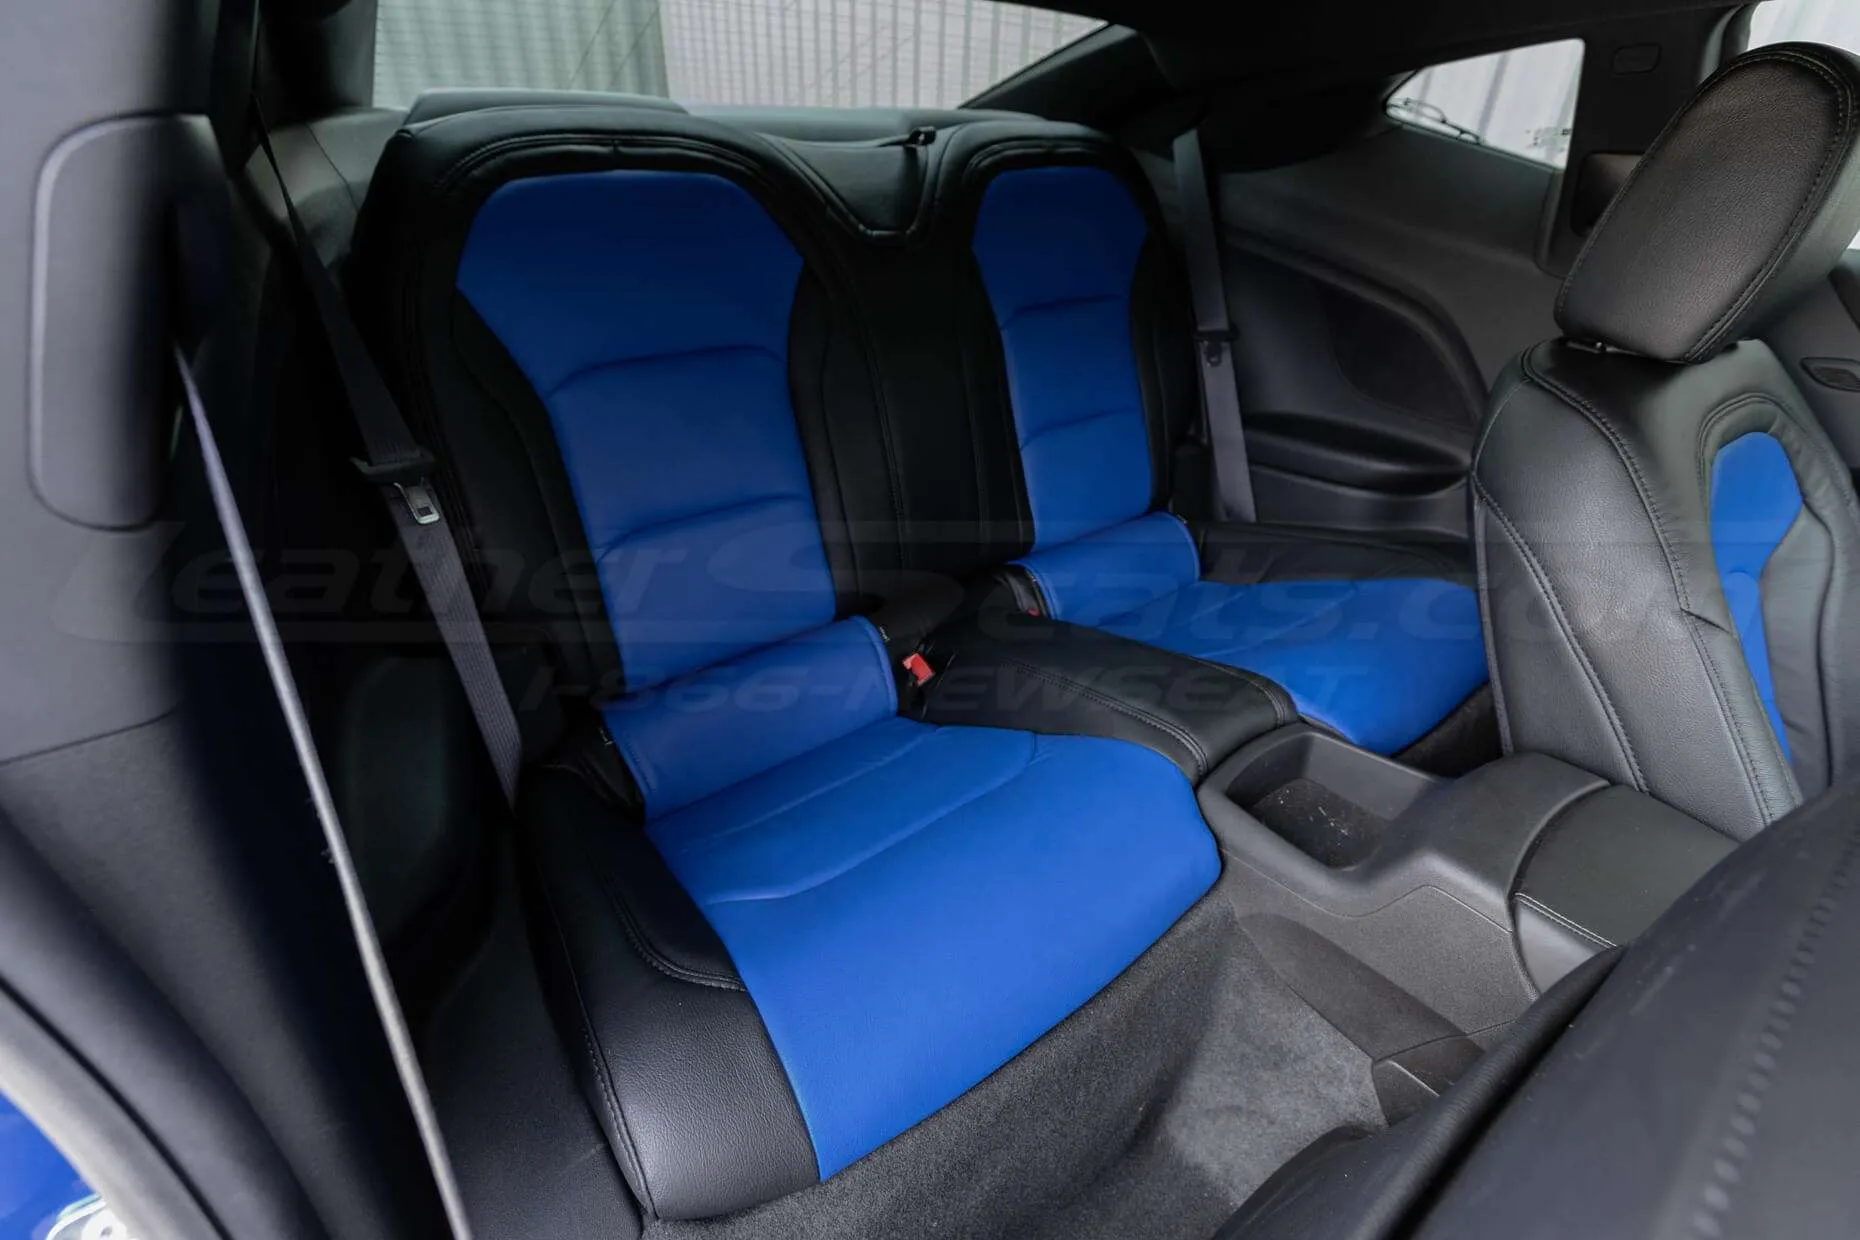 Installed Chevrolet Camaro Leather Seats - black & Cobalt - Rear seats from passenger side